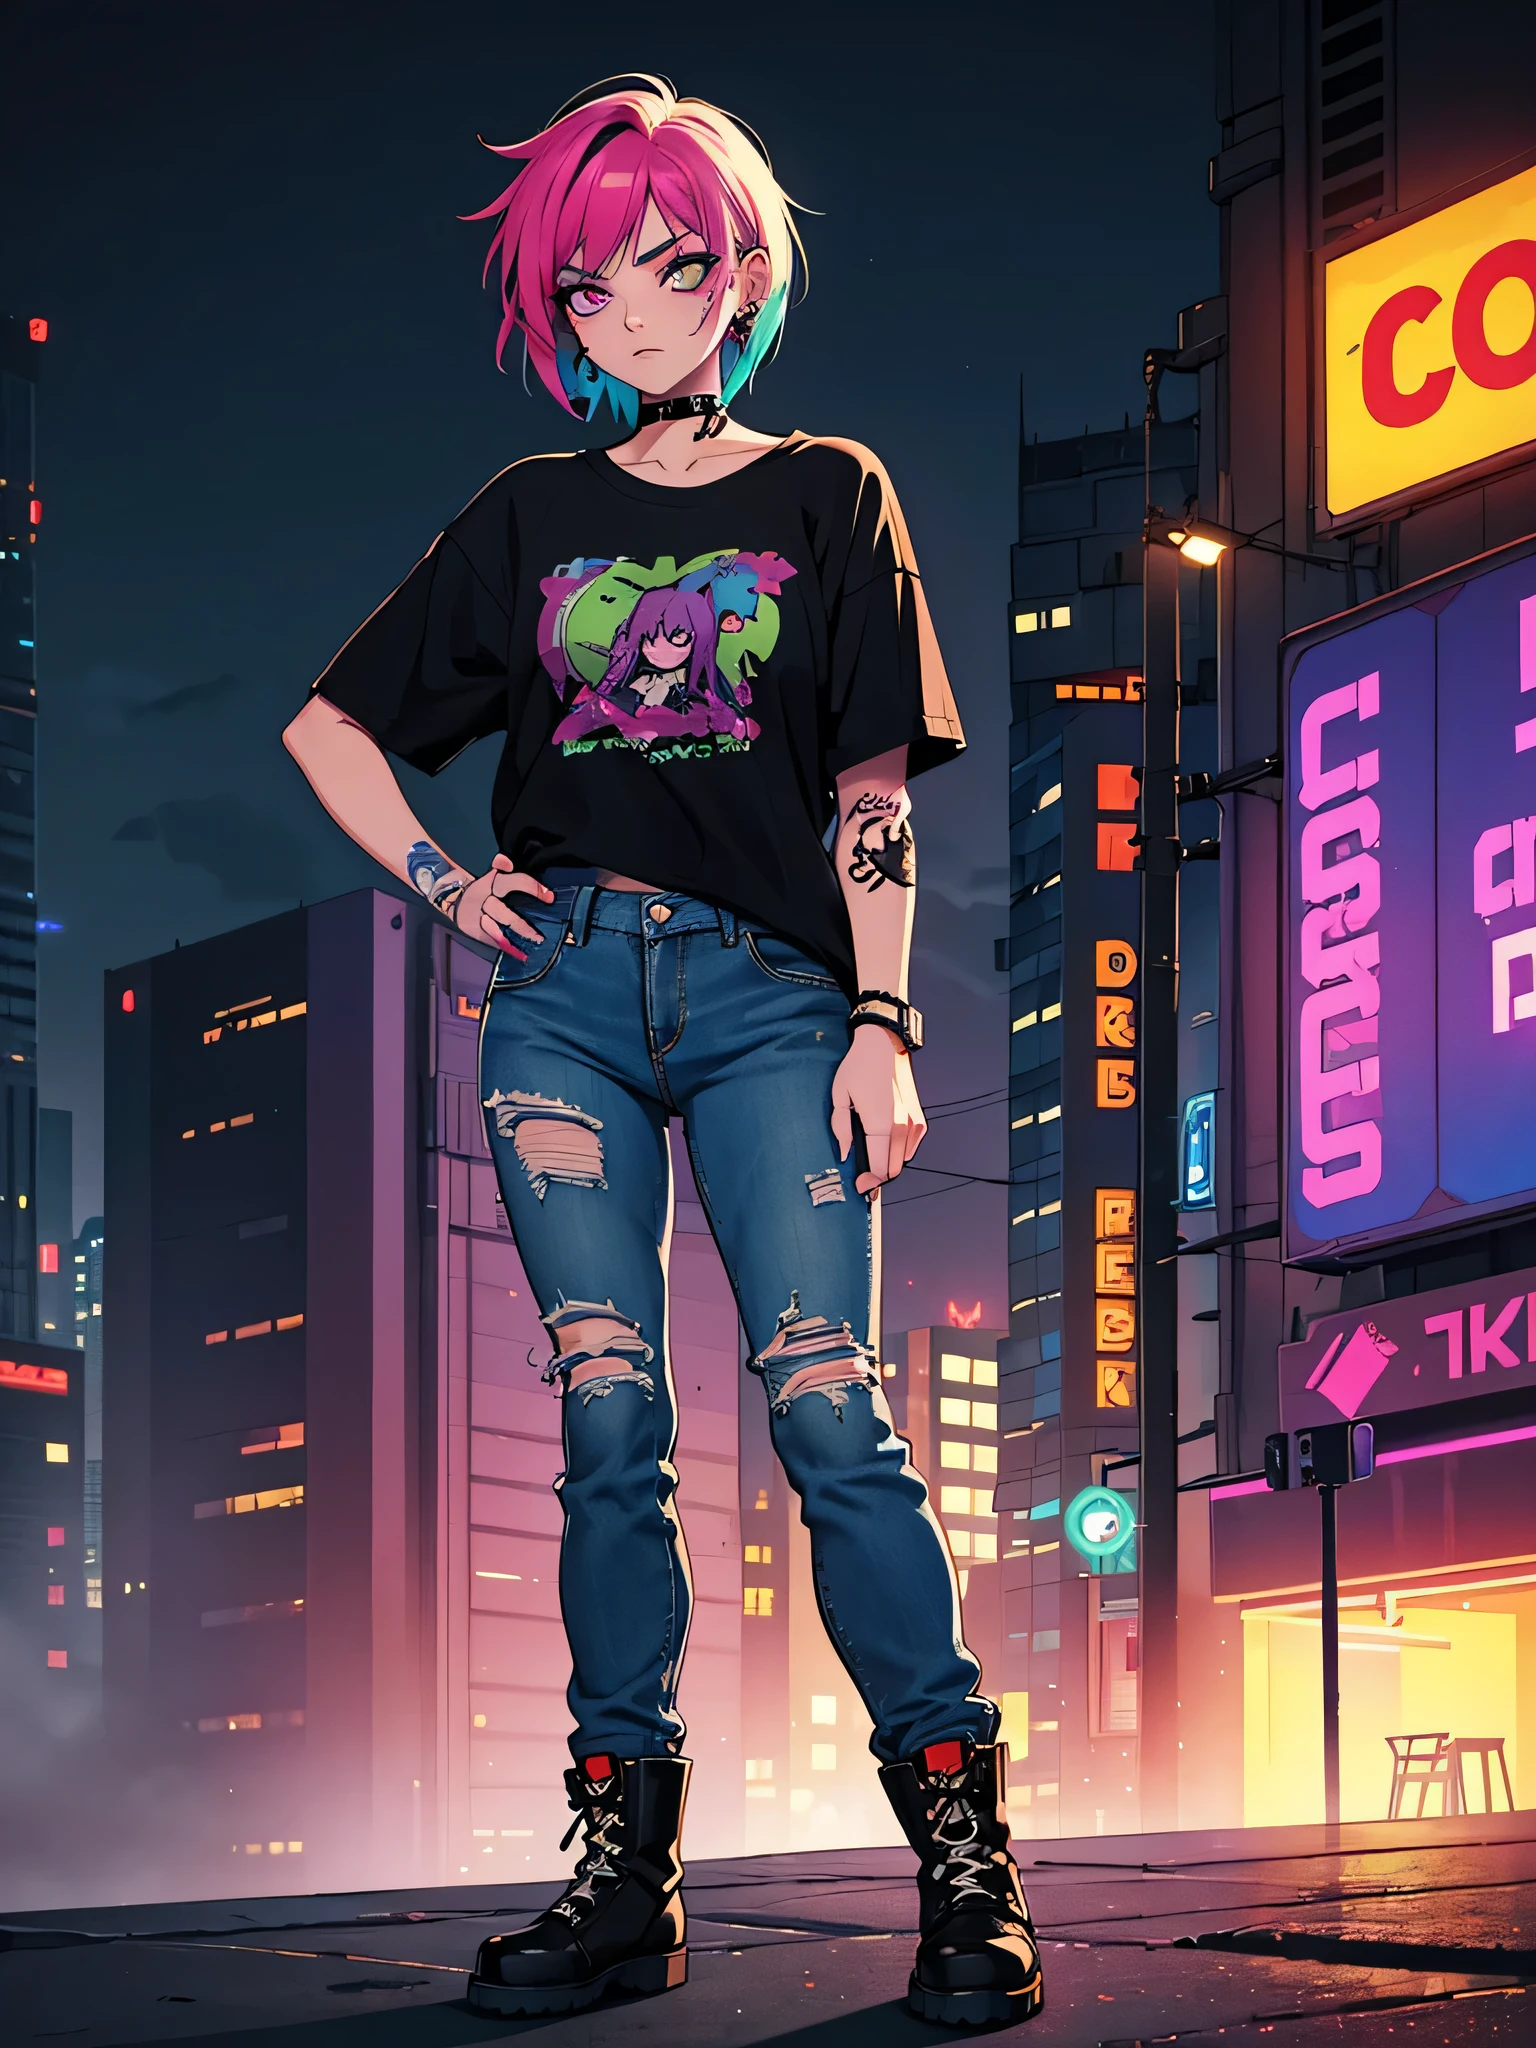 alternative girl,illustration,bright hair,colorful tattoos,piercings,grunge style,edgy makeup,distressed jeans,band t-shirt,vintage boots,fierce expression,confident pose,foggy background,city skyline,neon lights,dark and moody colors,soft ambient lighting